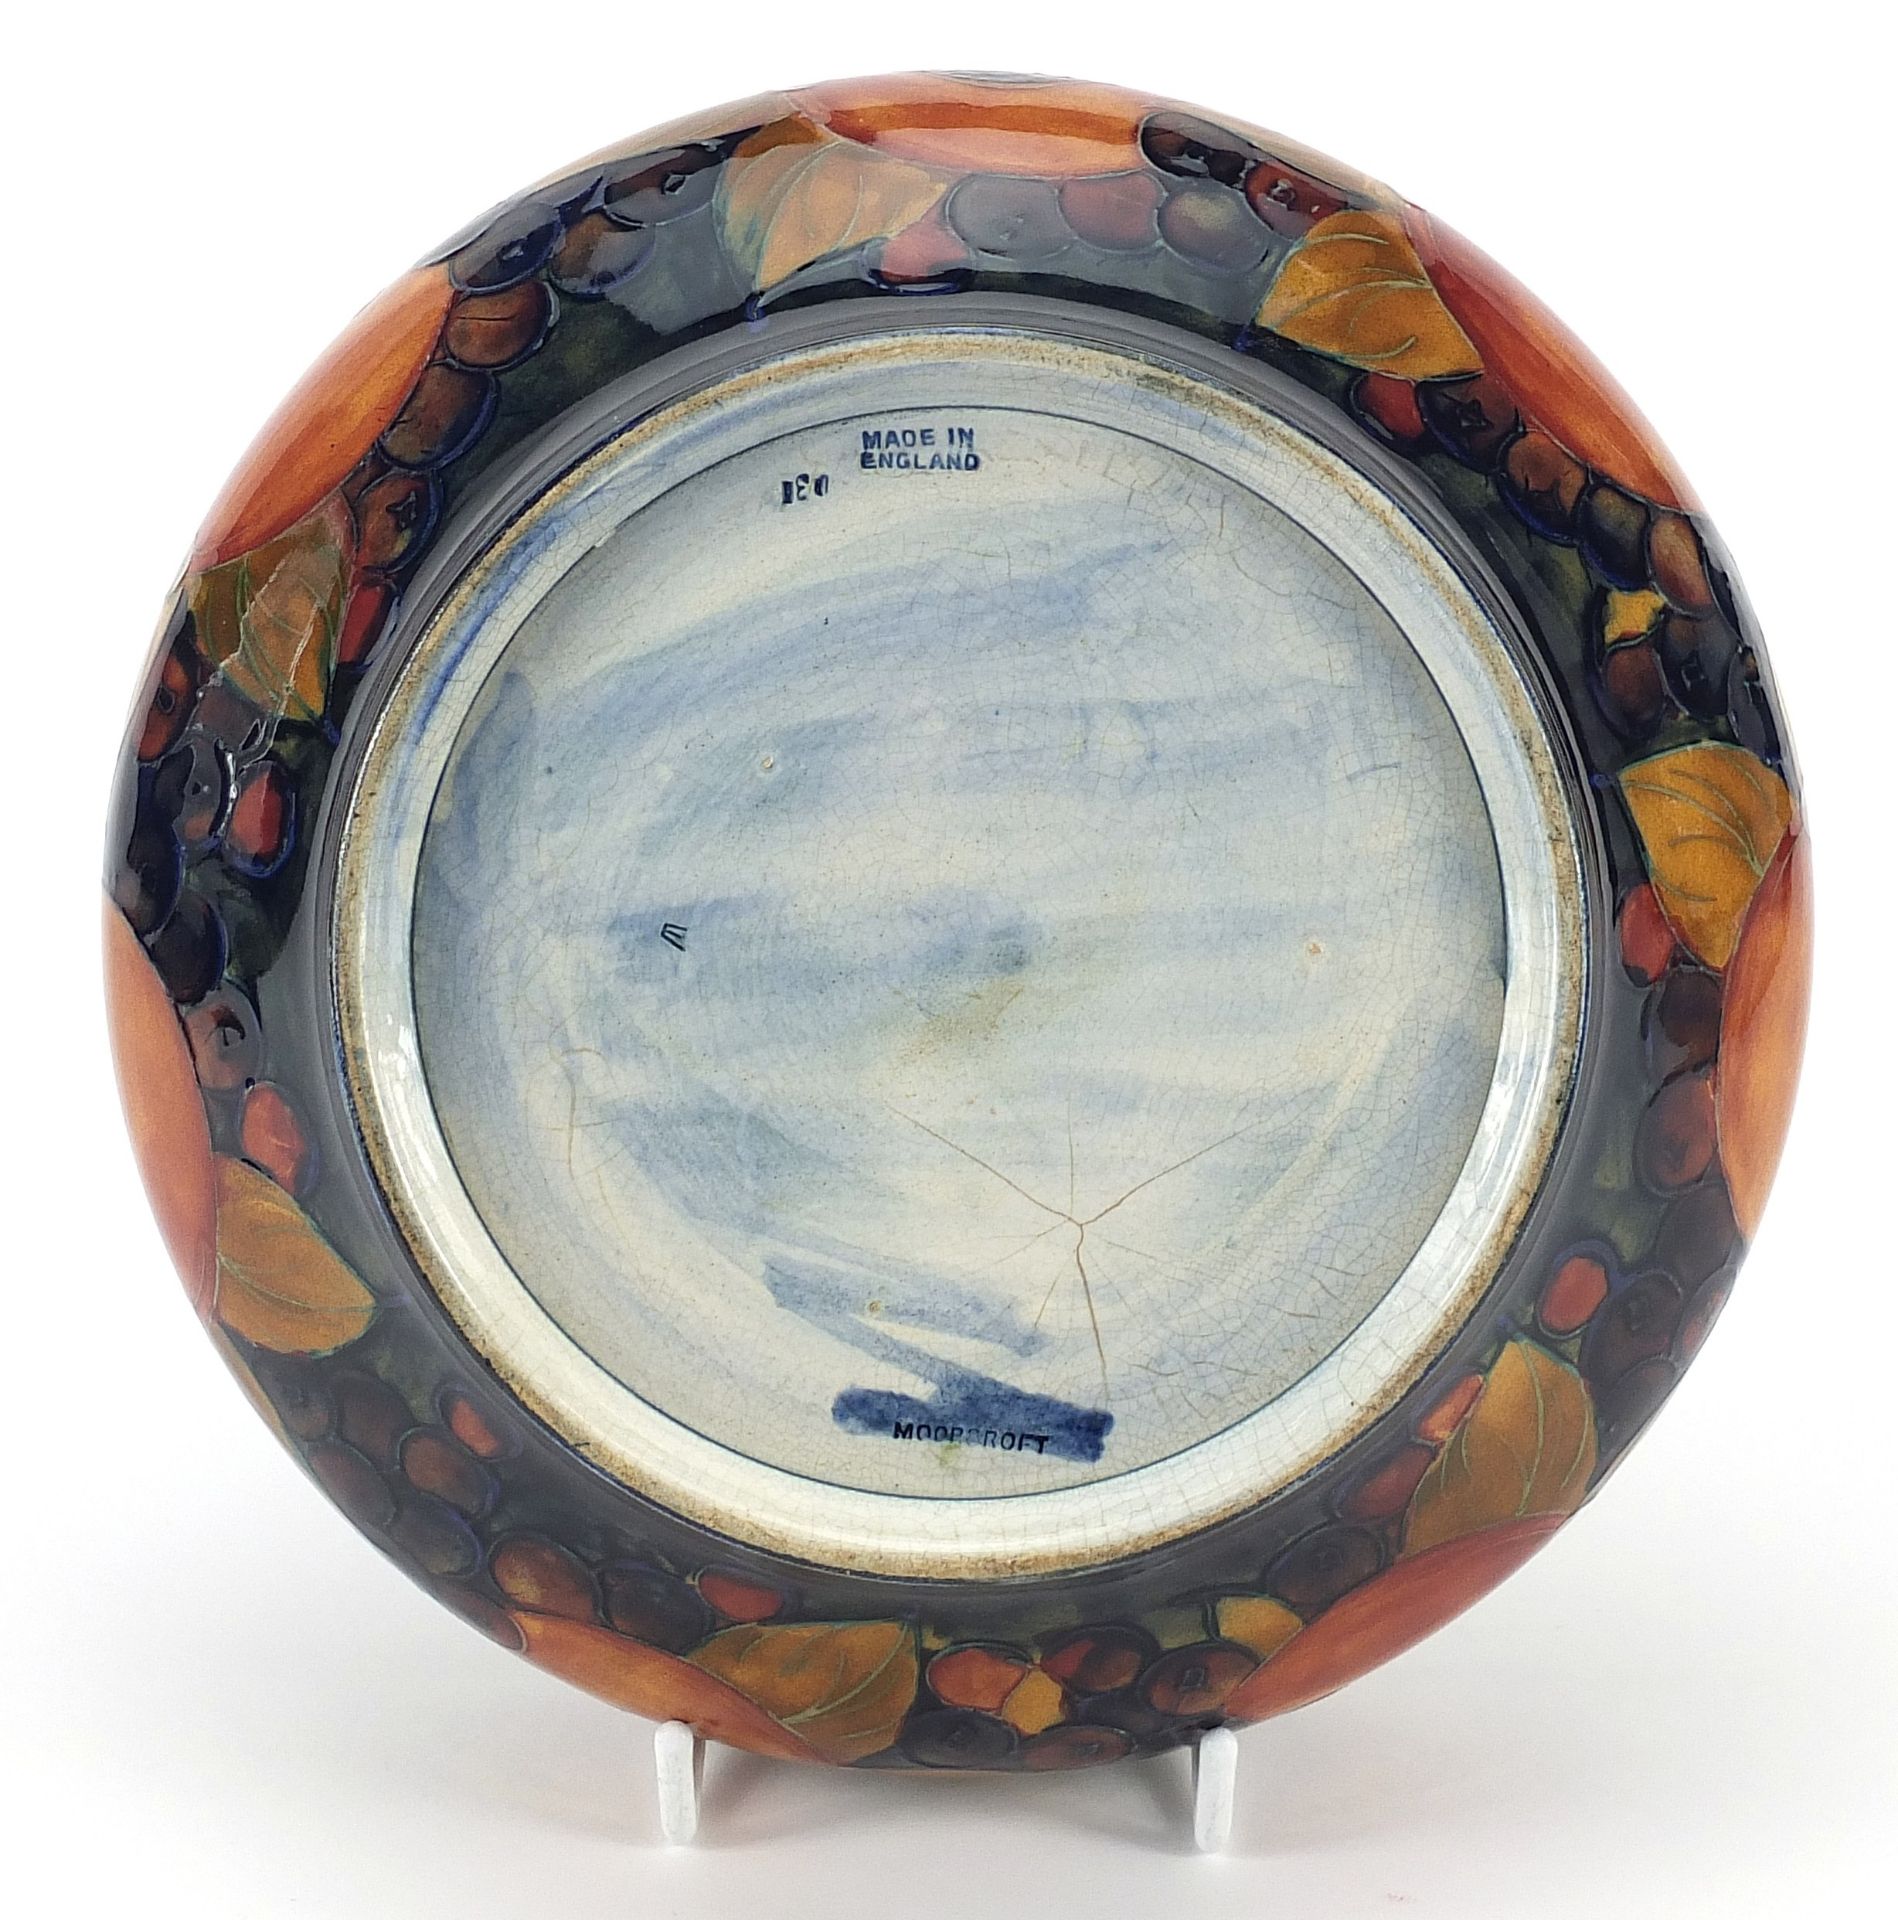 William Moorcroft pottery bowl with silver plated rim hand painted with flowers, 21cm in diameter - Image 3 of 3